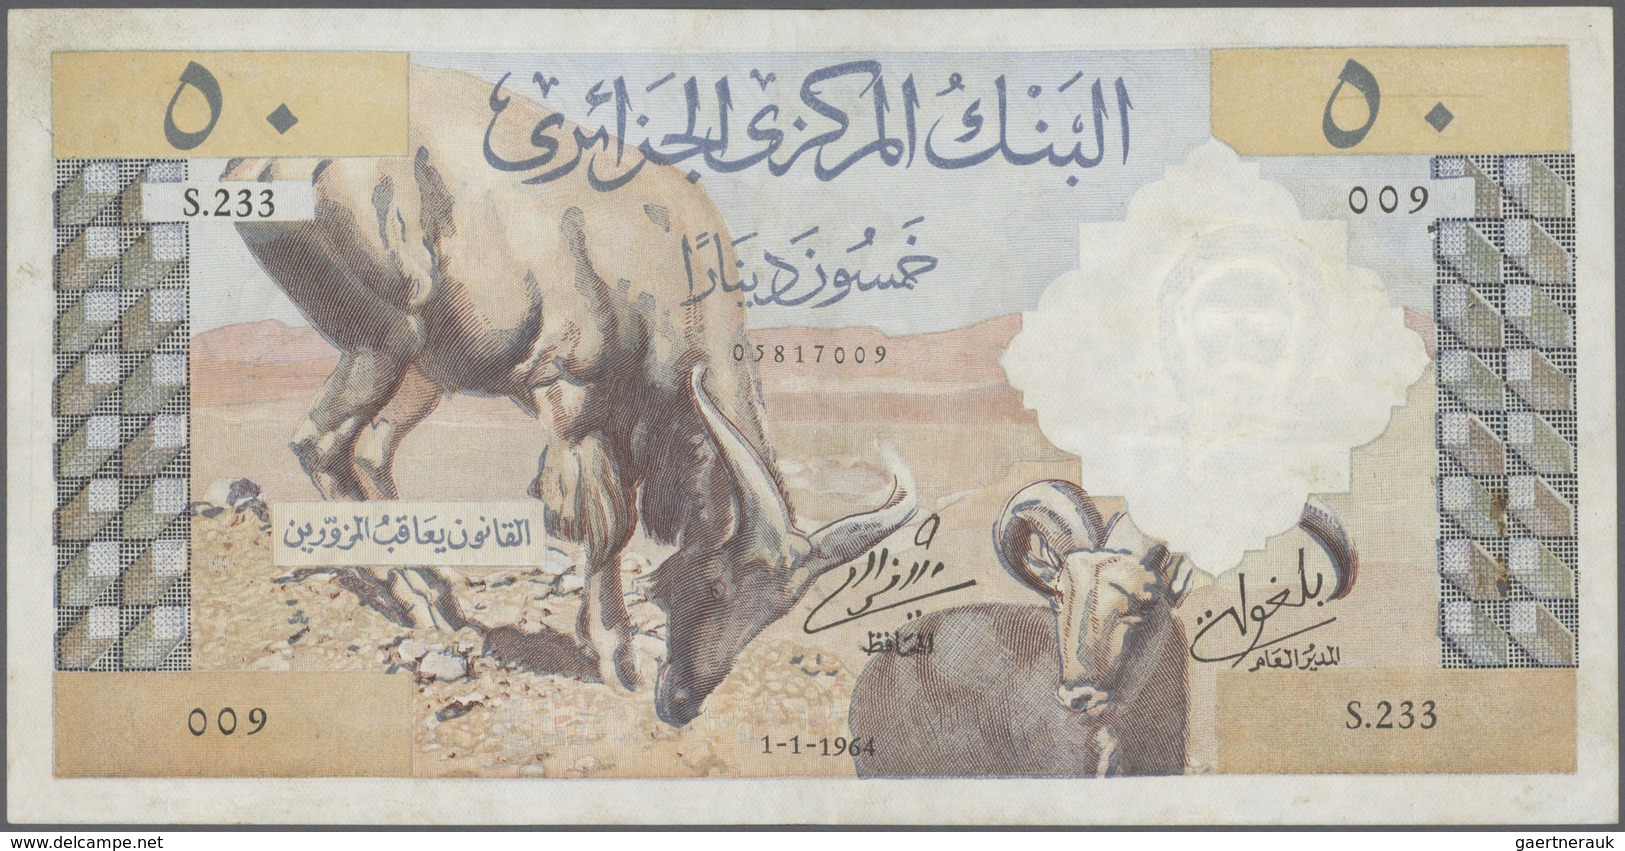 Algeria / Algerien: Set Of 2 Notes 50 Dinars 1964 P. 124, Both In Lightly Used Condition, Not Washed - Algeria